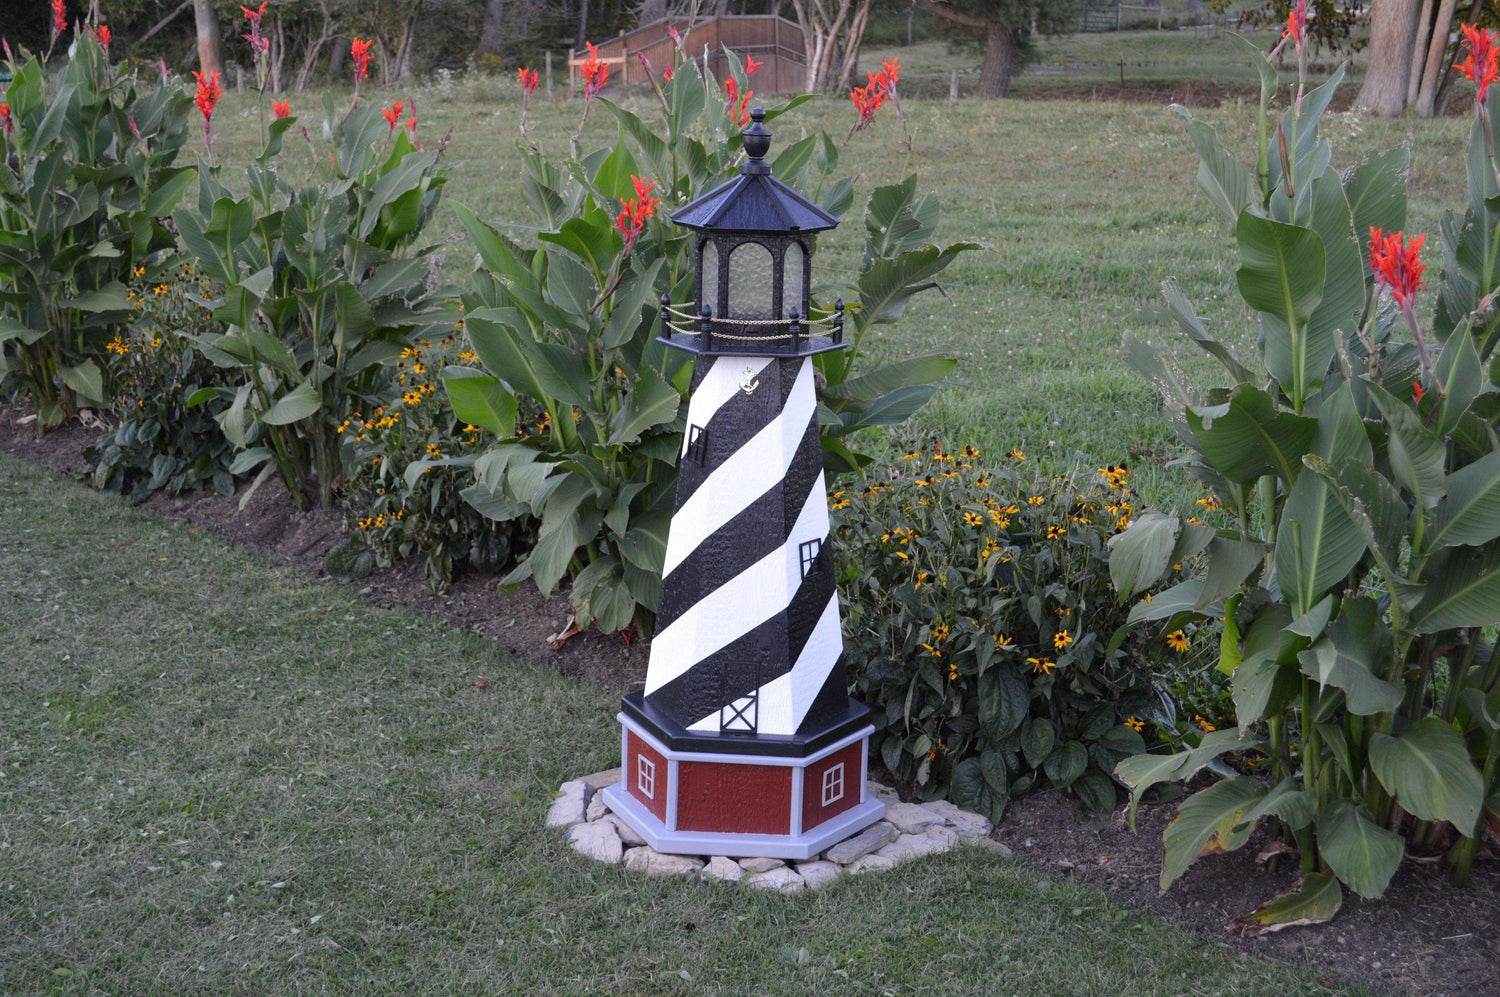 Amish Outdoor Lighthouse Replica Lawn Ornament Collection